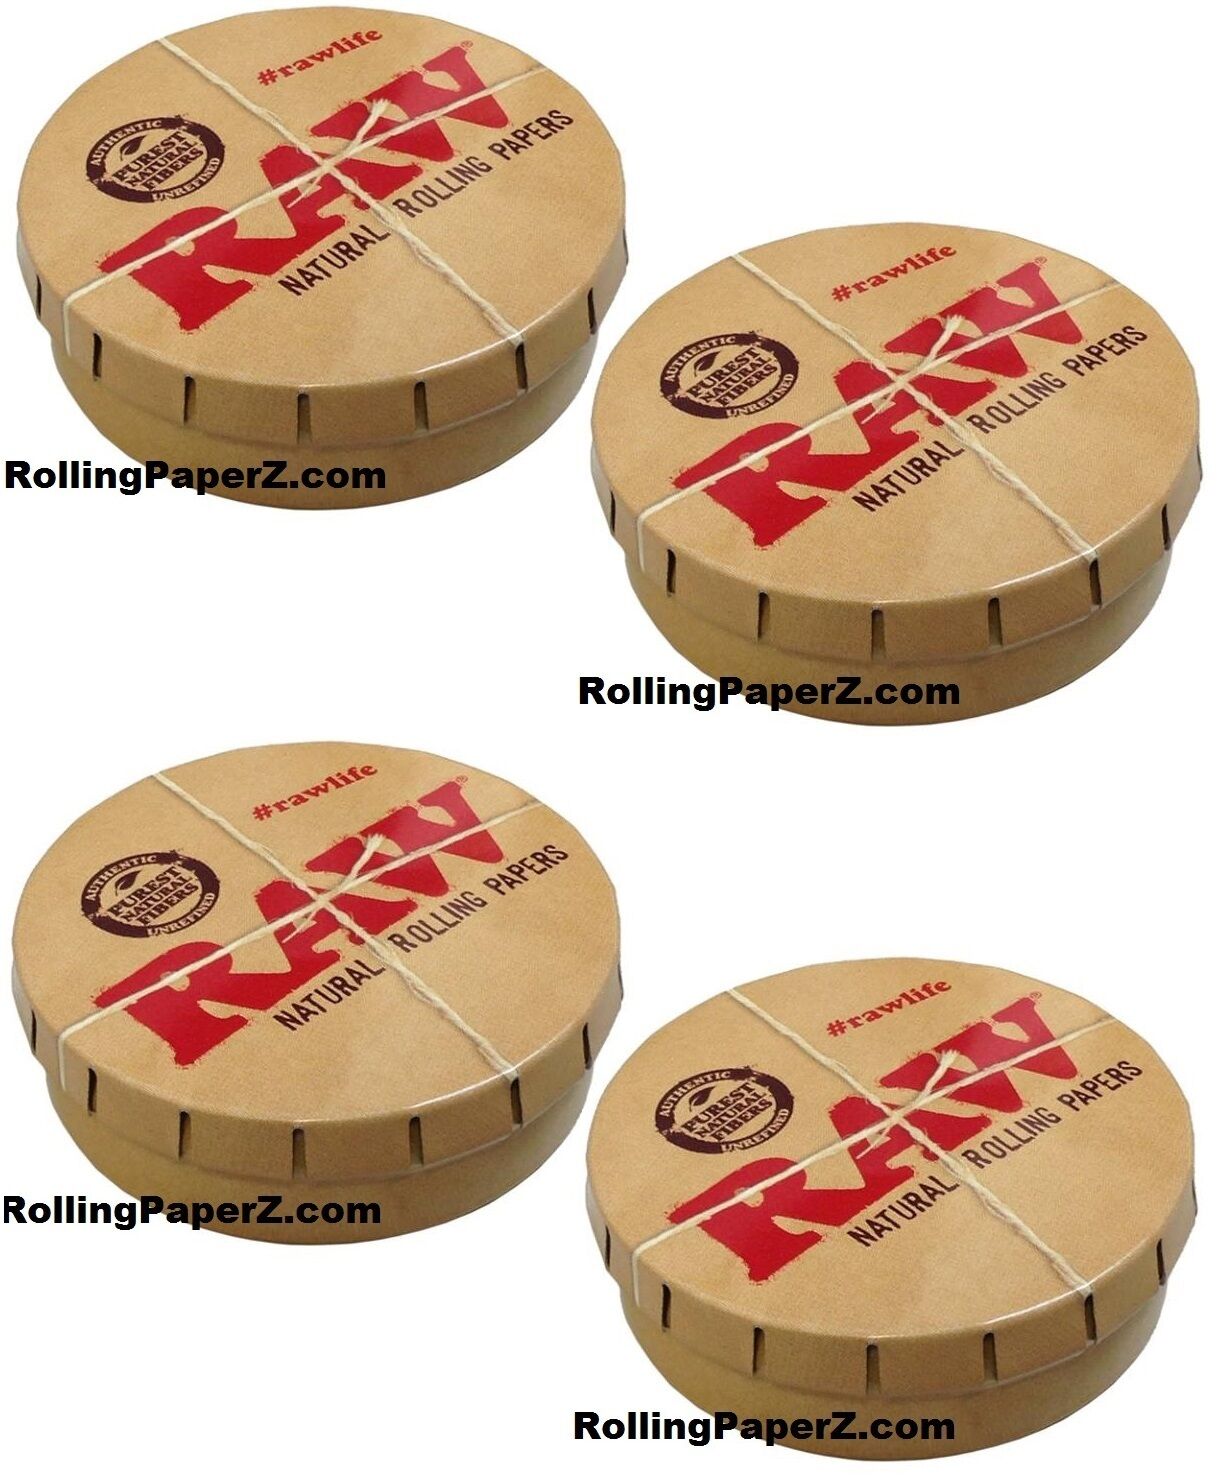 BUY 4x RAW Rolling papers Round Pop-Top Tobacco Smoking Accessories Storage Tin